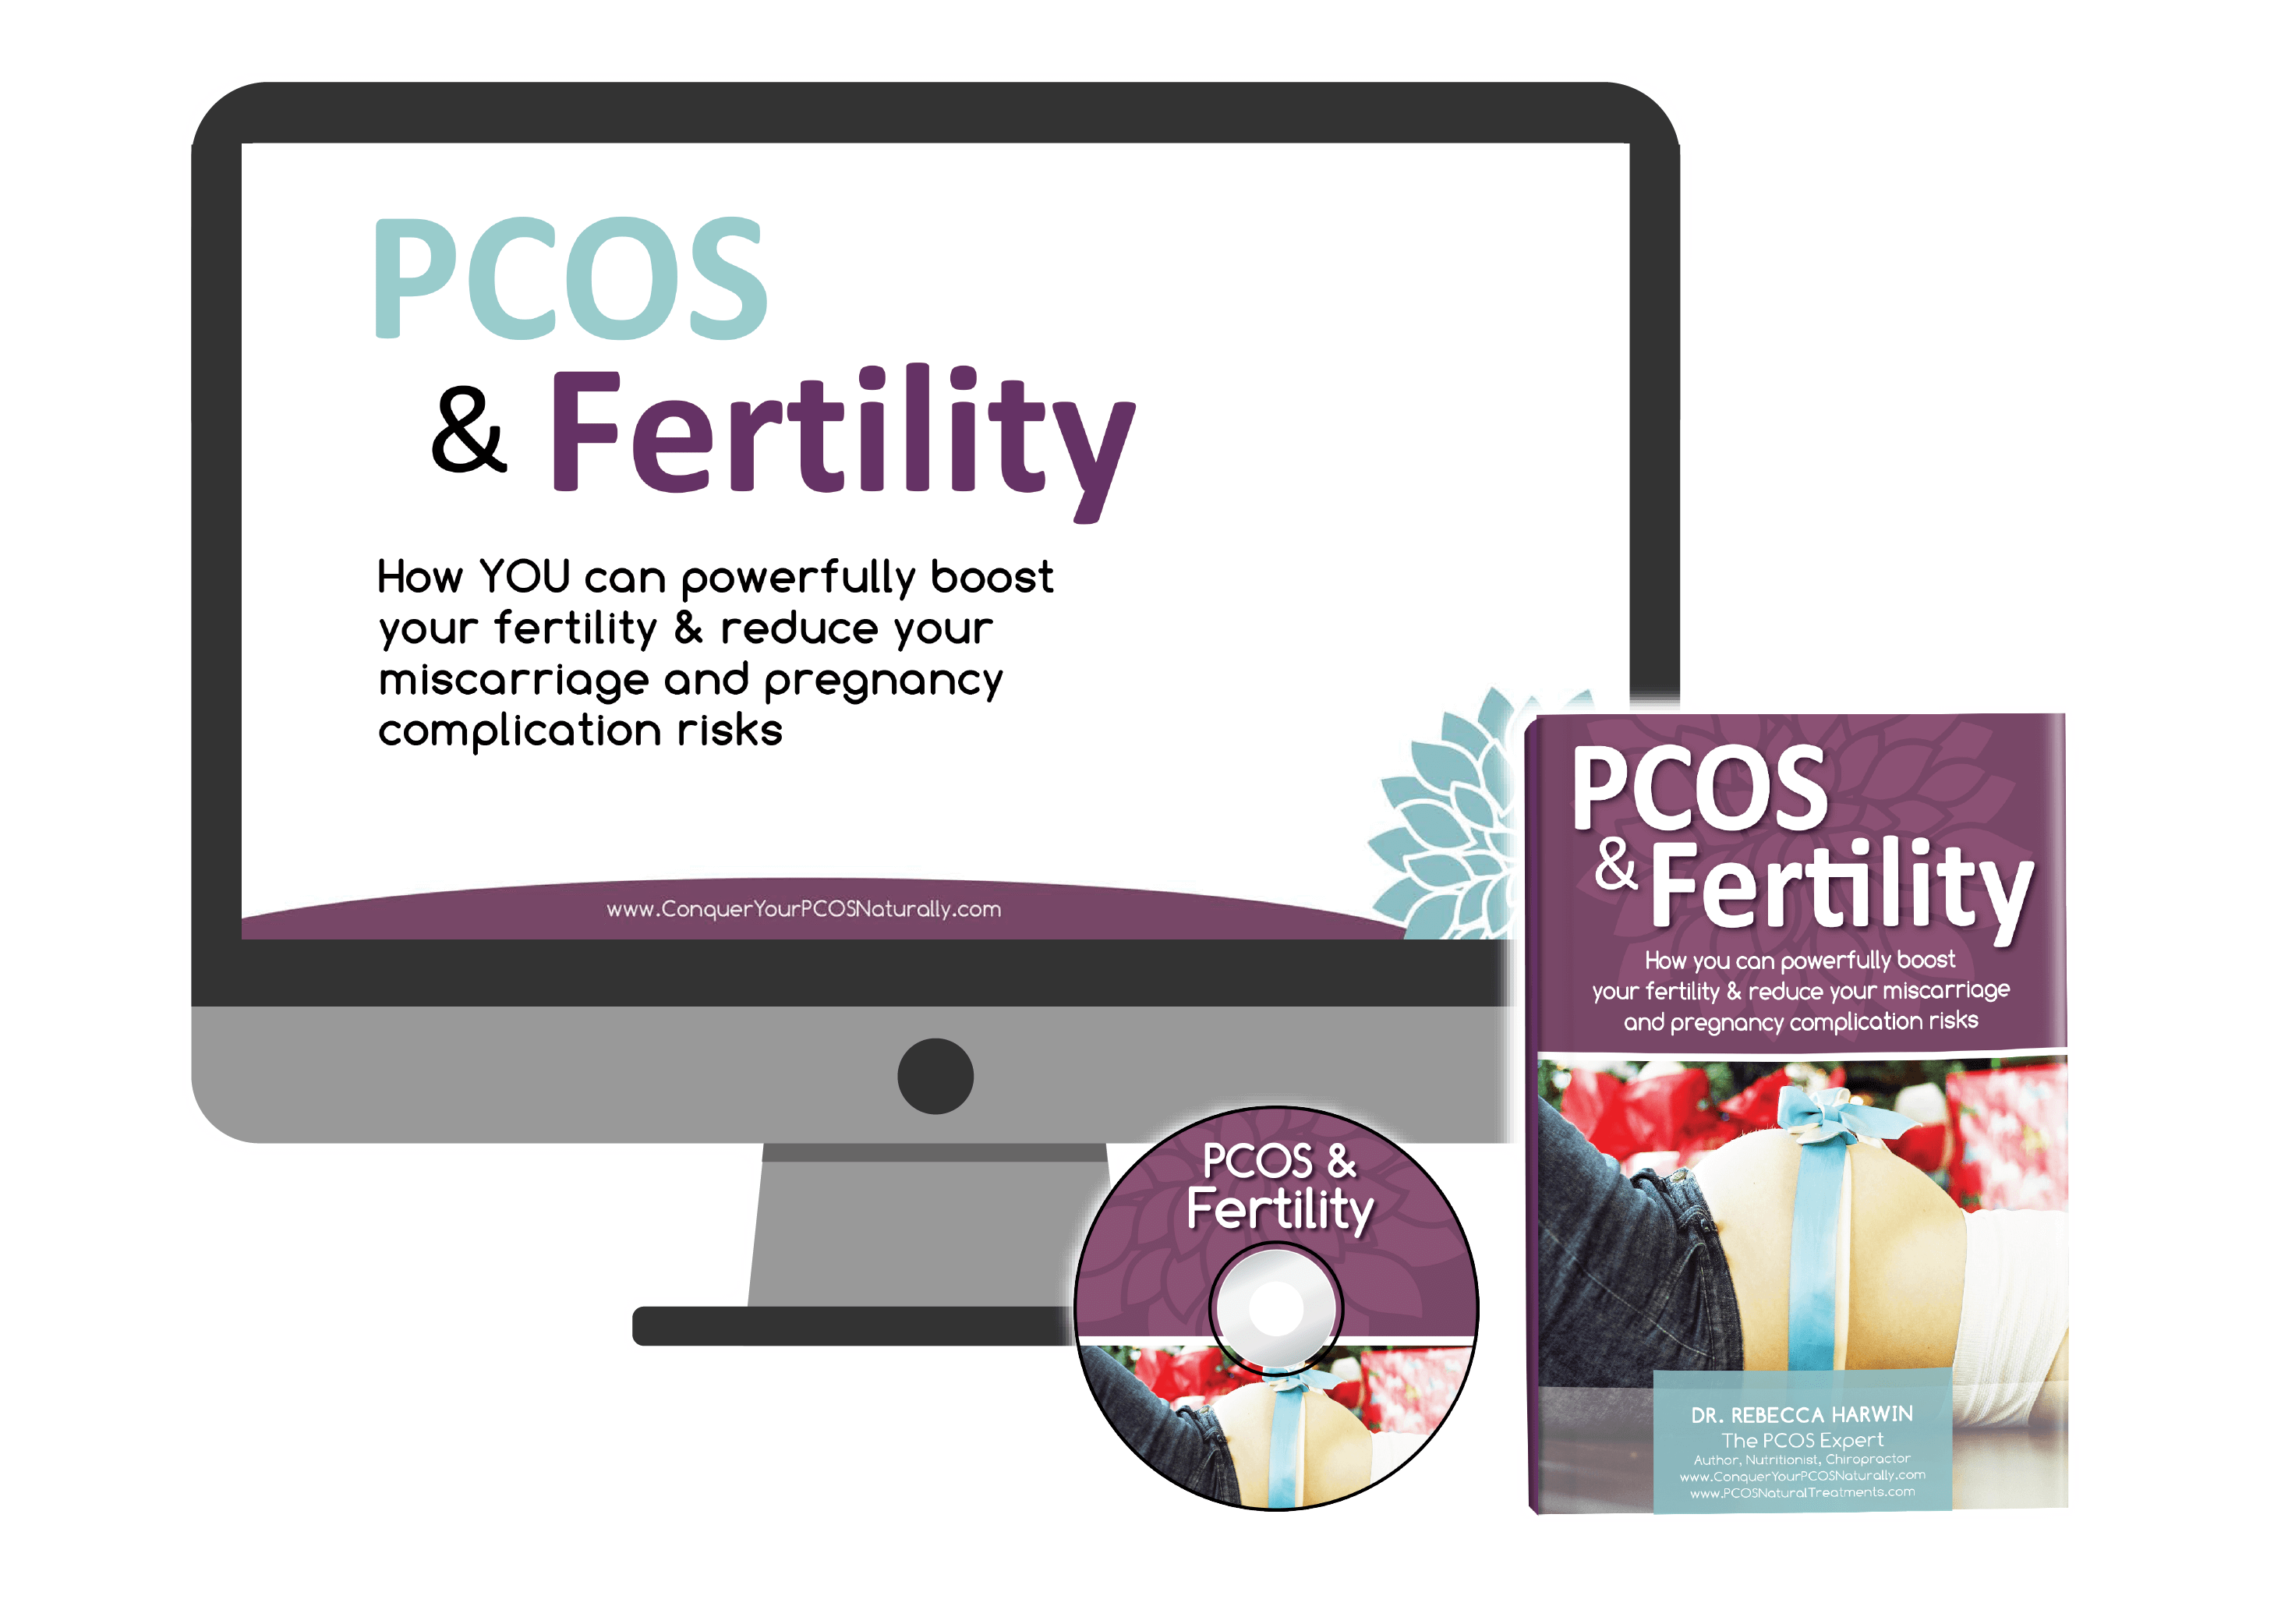 how to get pregnant with PCOS